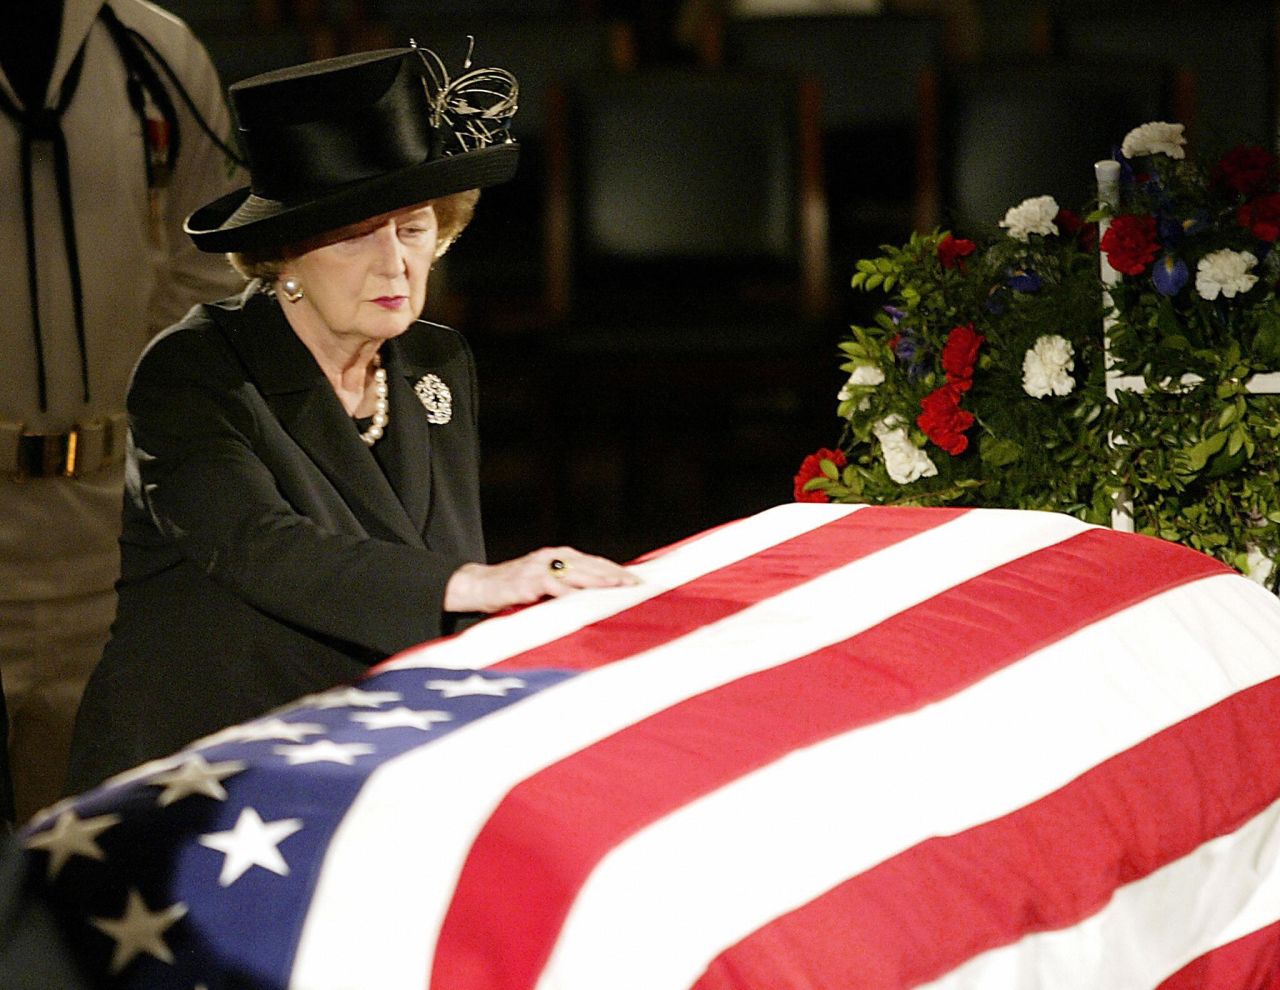 Thatcher touches the flag-draped coffin of Reagan as he lies in state in the U.S. Capitol Rotunda in June 2004.  In a prerecorded video at his funeral, she called Reagan "a great president, a great American and a great man." "And I have lost a dear friend," she said.